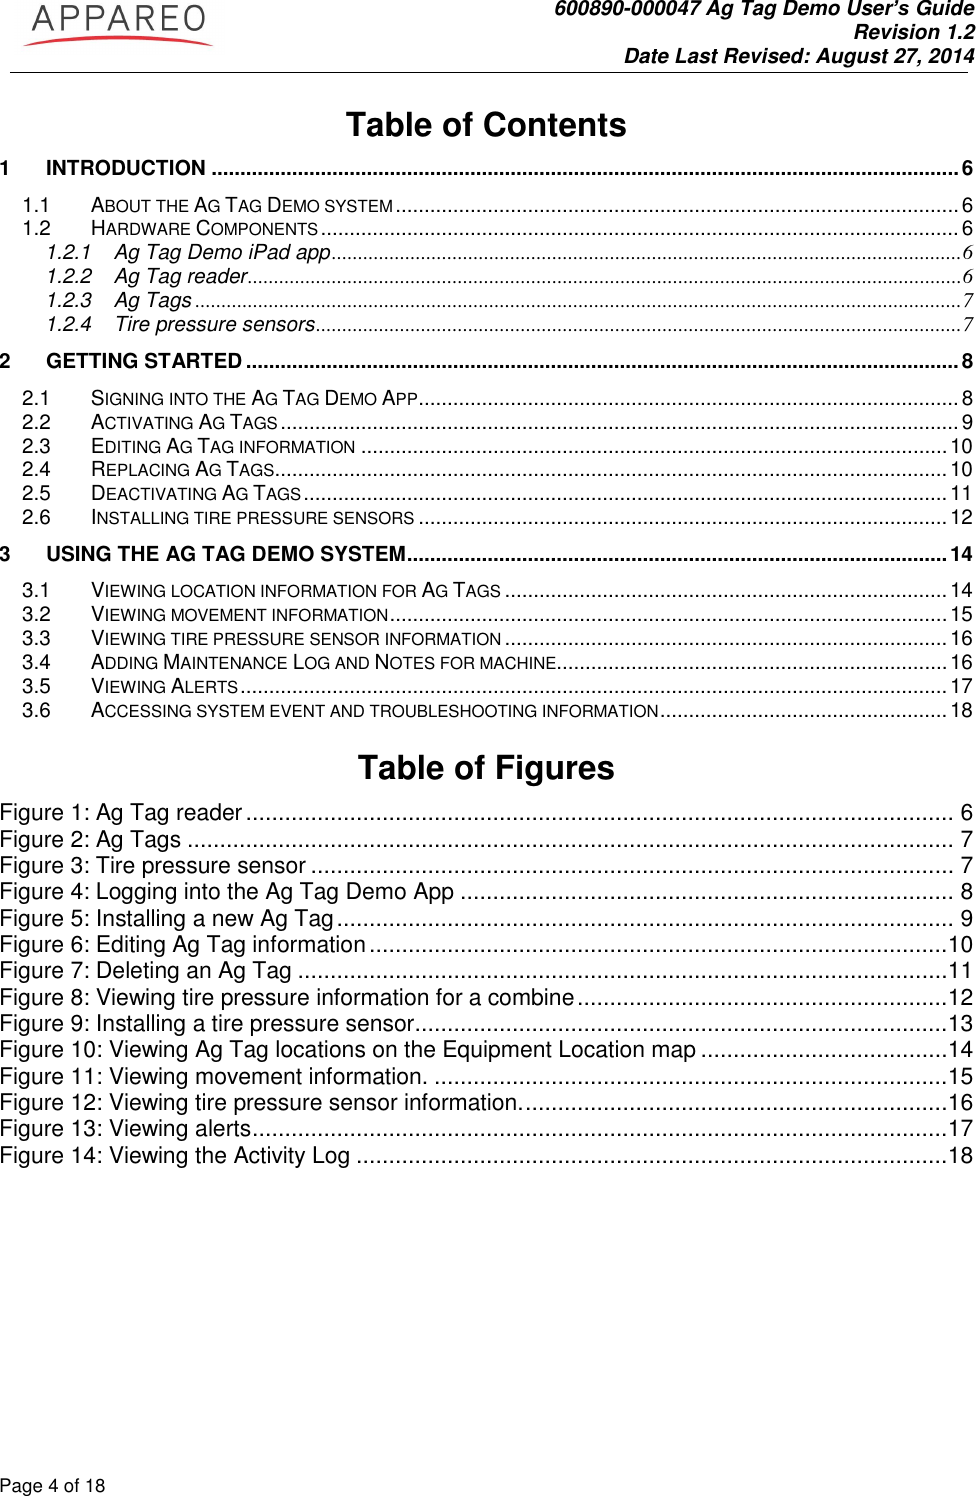               600890-000047 Ag Tag Demo User’s Guide   Revision 1.2 Date Last Revised: August 27, 2014 Page 4 of 18       Table of Contents 1 INTRODUCTION .................................................................................................................................. 6 1.1 ABOUT THE AG TAG DEMO SYSTEM .................................................................................................. 6 1.2 HARDWARE COMPONENTS ............................................................................................................... 6 1.2.1 Ag Tag Demo iPad app ........................................................................................................................ 6 1.2.2 Ag Tag reader ........................................................................................................................................ 6 1.2.3 Ag Tags .................................................................................................................................................. 7 1.2.4 Tire pressure sensors ........................................................................................................................... 7 2 GETTING STARTED ............................................................................................................................ 8 2.1 SIGNING INTO THE AG TAG DEMO APP .............................................................................................. 8 2.2 ACTIVATING AG TAGS ...................................................................................................................... 9 2.3 EDITING AG TAG INFORMATION ...................................................................................................... 10 2.4 REPLACING AG TAGS ..................................................................................................................... 10 2.5 DEACTIVATING AG TAGS ................................................................................................................ 11 2.6 INSTALLING TIRE PRESSURE SENSORS ............................................................................................ 12 3 USING THE AG TAG DEMO SYSTEM .............................................................................................. 14 3.1 VIEWING LOCATION INFORMATION FOR AG TAGS ............................................................................. 14 3.2 VIEWING MOVEMENT INFORMATION ................................................................................................. 15 3.3 VIEWING TIRE PRESSURE SENSOR INFORMATION ............................................................................. 16 3.4 ADDING MAINTENANCE LOG AND NOTES FOR MACHINE.................................................................... 16 3.5 VIEWING ALERTS ........................................................................................................................... 17 3.6 ACCESSING SYSTEM EVENT AND TROUBLESHOOTING INFORMATION .................................................. 18  Table of Figures Figure 1: Ag Tag reader ............................................................................................................. 6 Figure 2: Ag Tags ...................................................................................................................... 7 Figure 3: Tire pressure sensor ................................................................................................... 7 Figure 4: Logging into the Ag Tag Demo App ............................................................................ 8 Figure 5: Installing a new Ag Tag ............................................................................................... 9 Figure 6: Editing Ag Tag information .........................................................................................10 Figure 7: Deleting an Ag Tag ....................................................................................................11 Figure 8: Viewing tire pressure information for a combine .........................................................12 Figure 9: Installing a tire pressure sensor ..................................................................................13 Figure 10: Viewing Ag Tag locations on the Equipment Location map ......................................14 Figure 11: Viewing movement information. ...............................................................................15 Figure 12: Viewing tire pressure sensor information. .................................................................16 Figure 13: Viewing alerts ...........................................................................................................17 Figure 14: Viewing the Activity Log ...........................................................................................18    